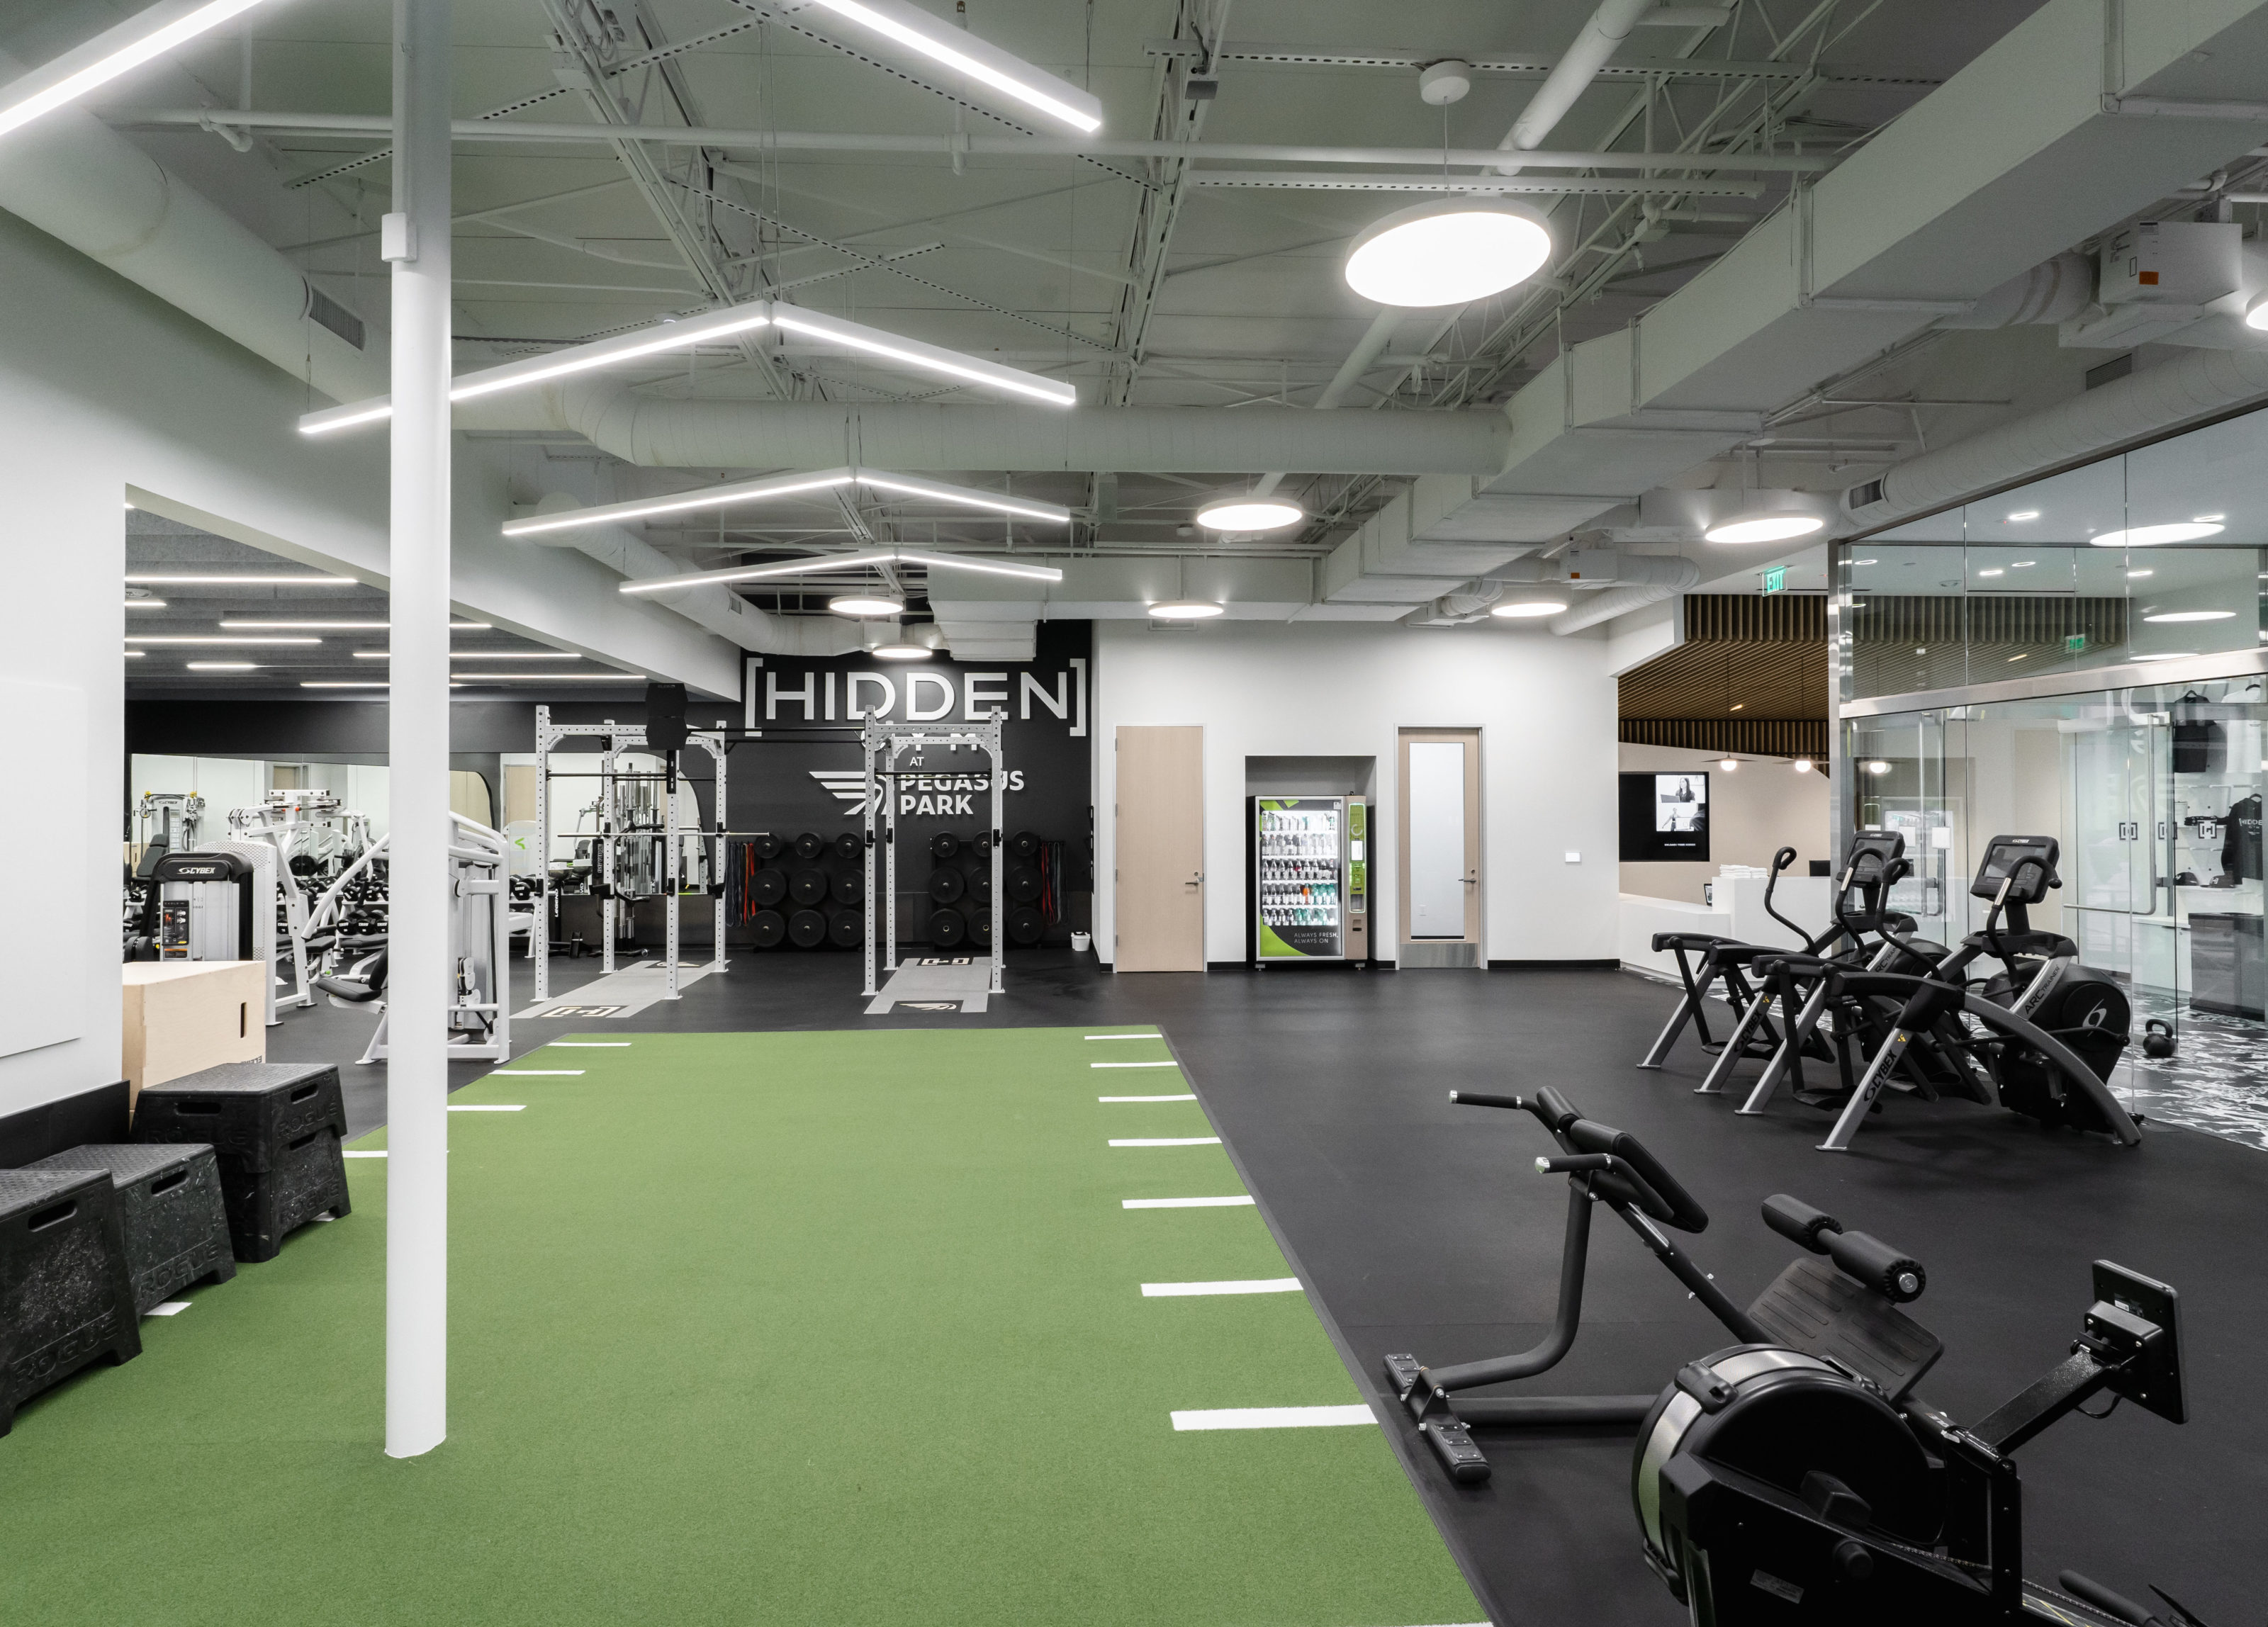 [Hidden Gym] at Pegasus Park is your on-campus fitness headquarters, designed to help you be your best each day. Step into the friendly atmosphere of our on-campus fitness community and leave feeling better than when you walked in!